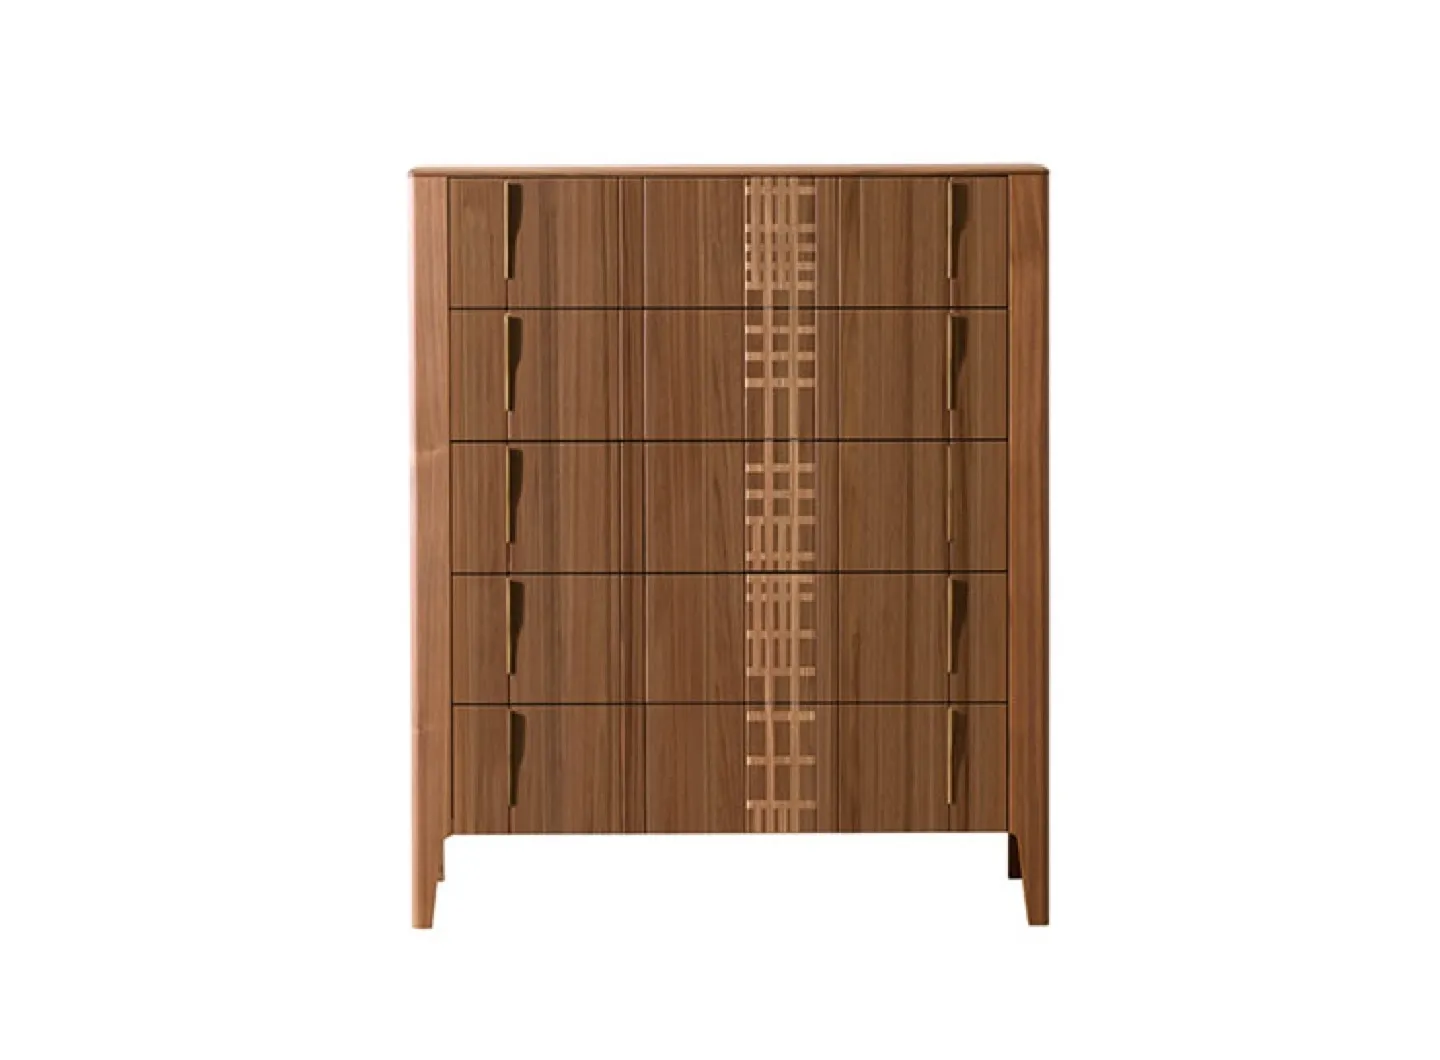 Domino chest of drawers